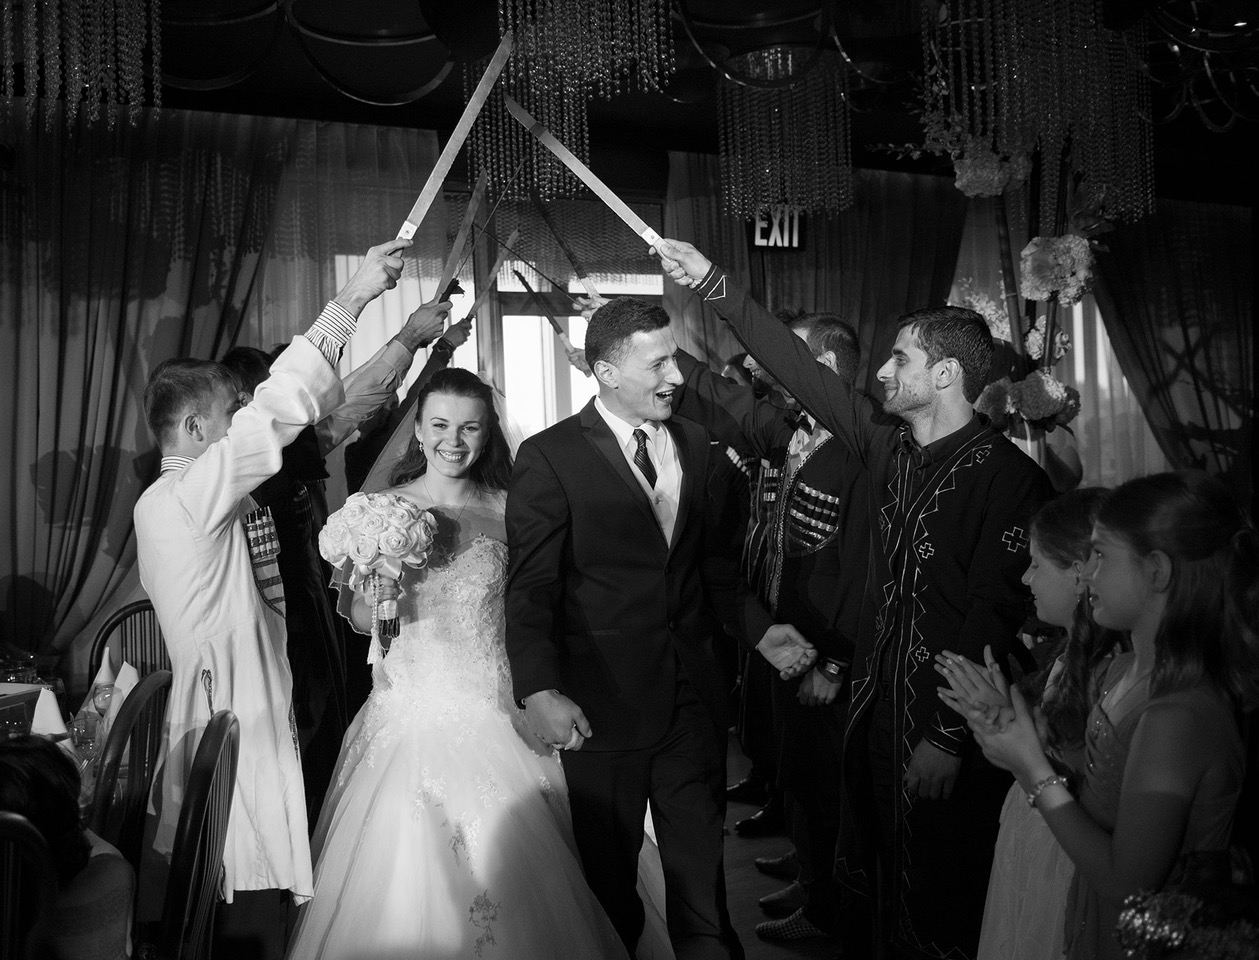 Bride Kate smiling as she passes under swords at wedding